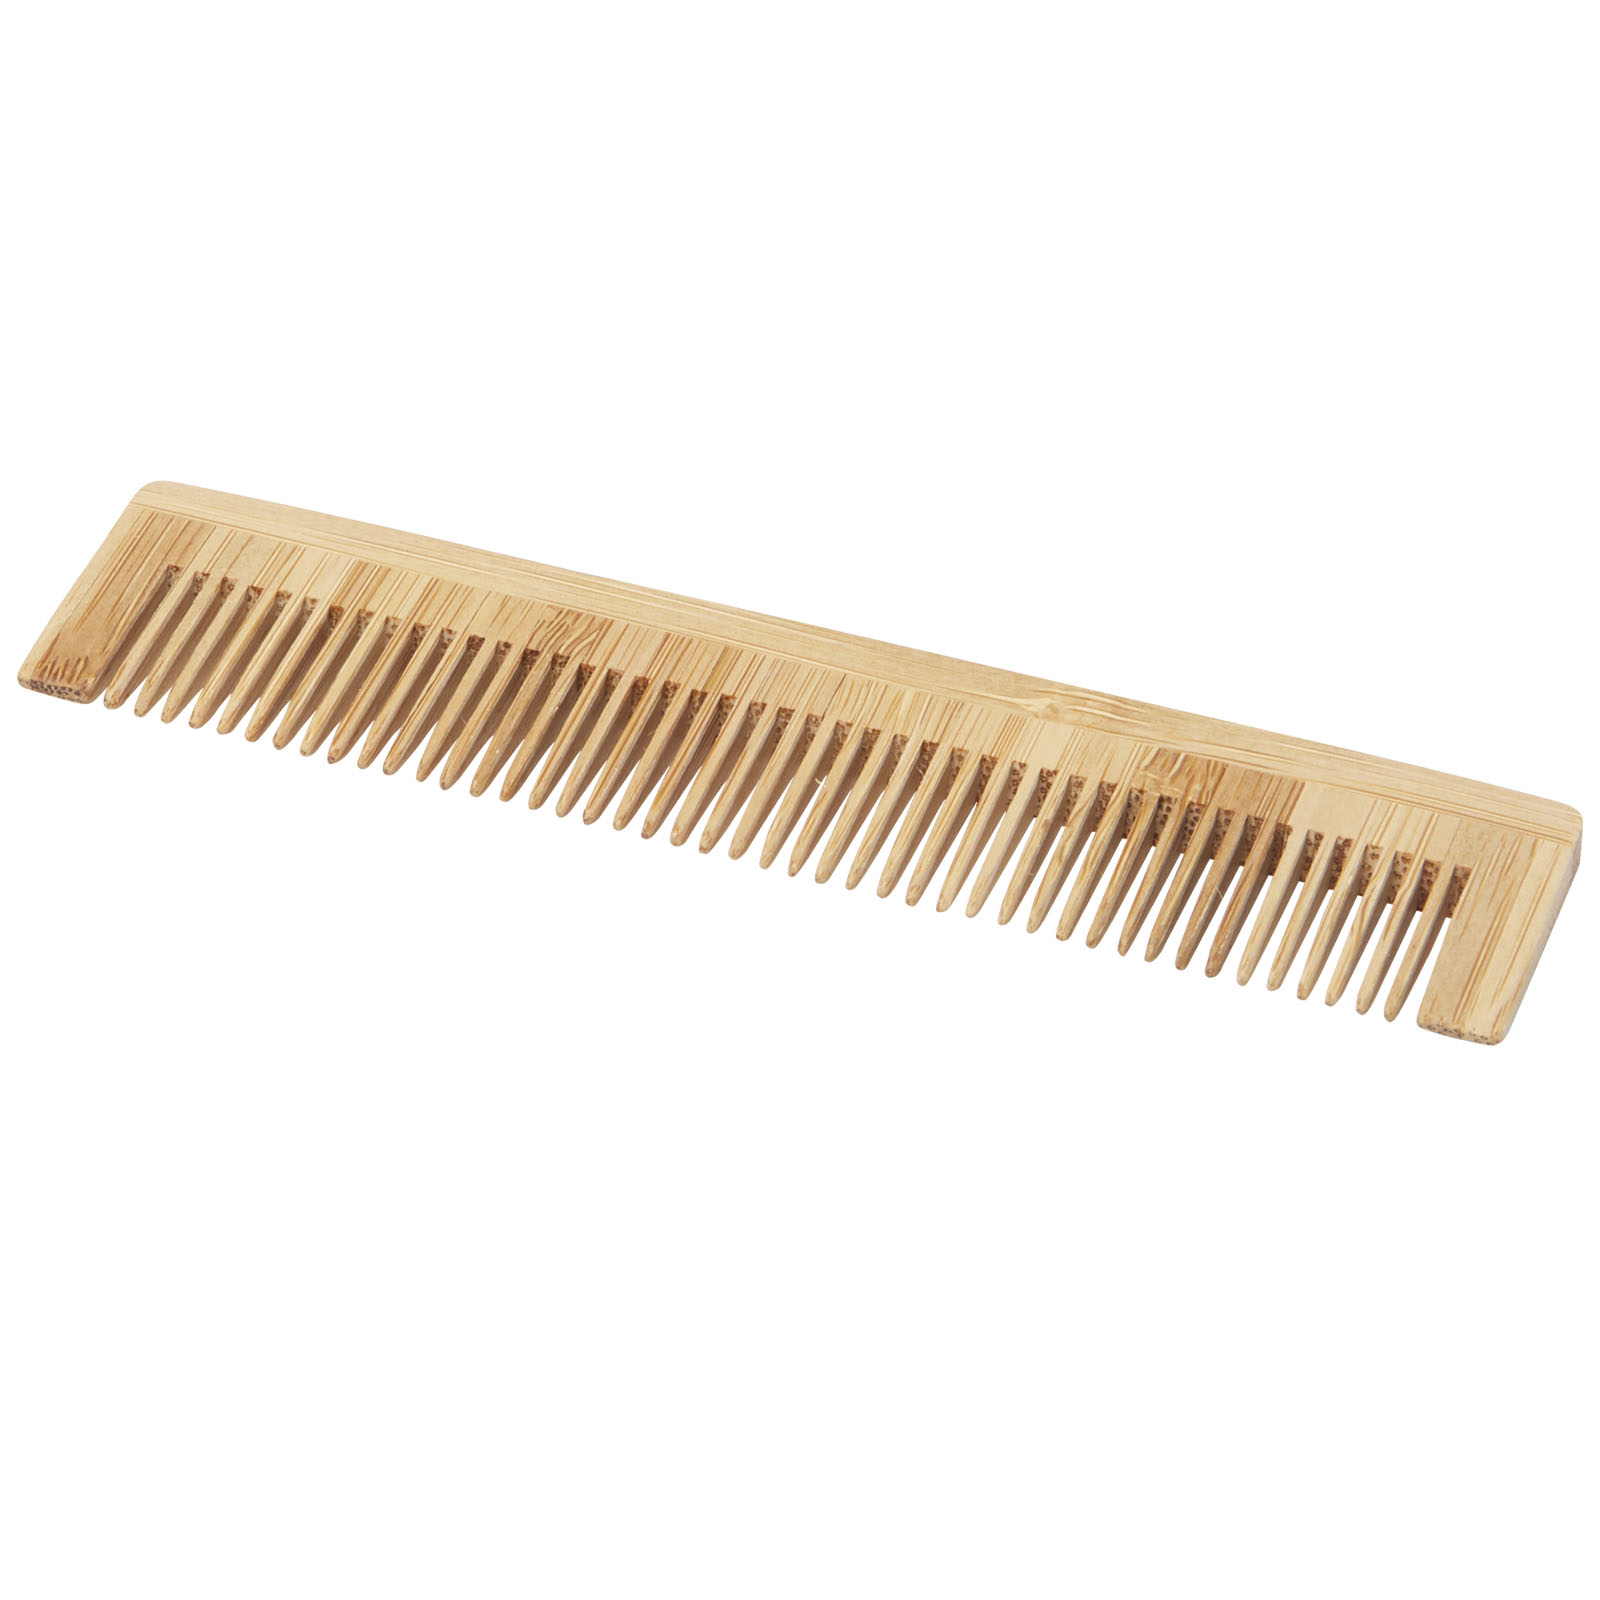 Advertising Personal Care - Hesty bamboo comb